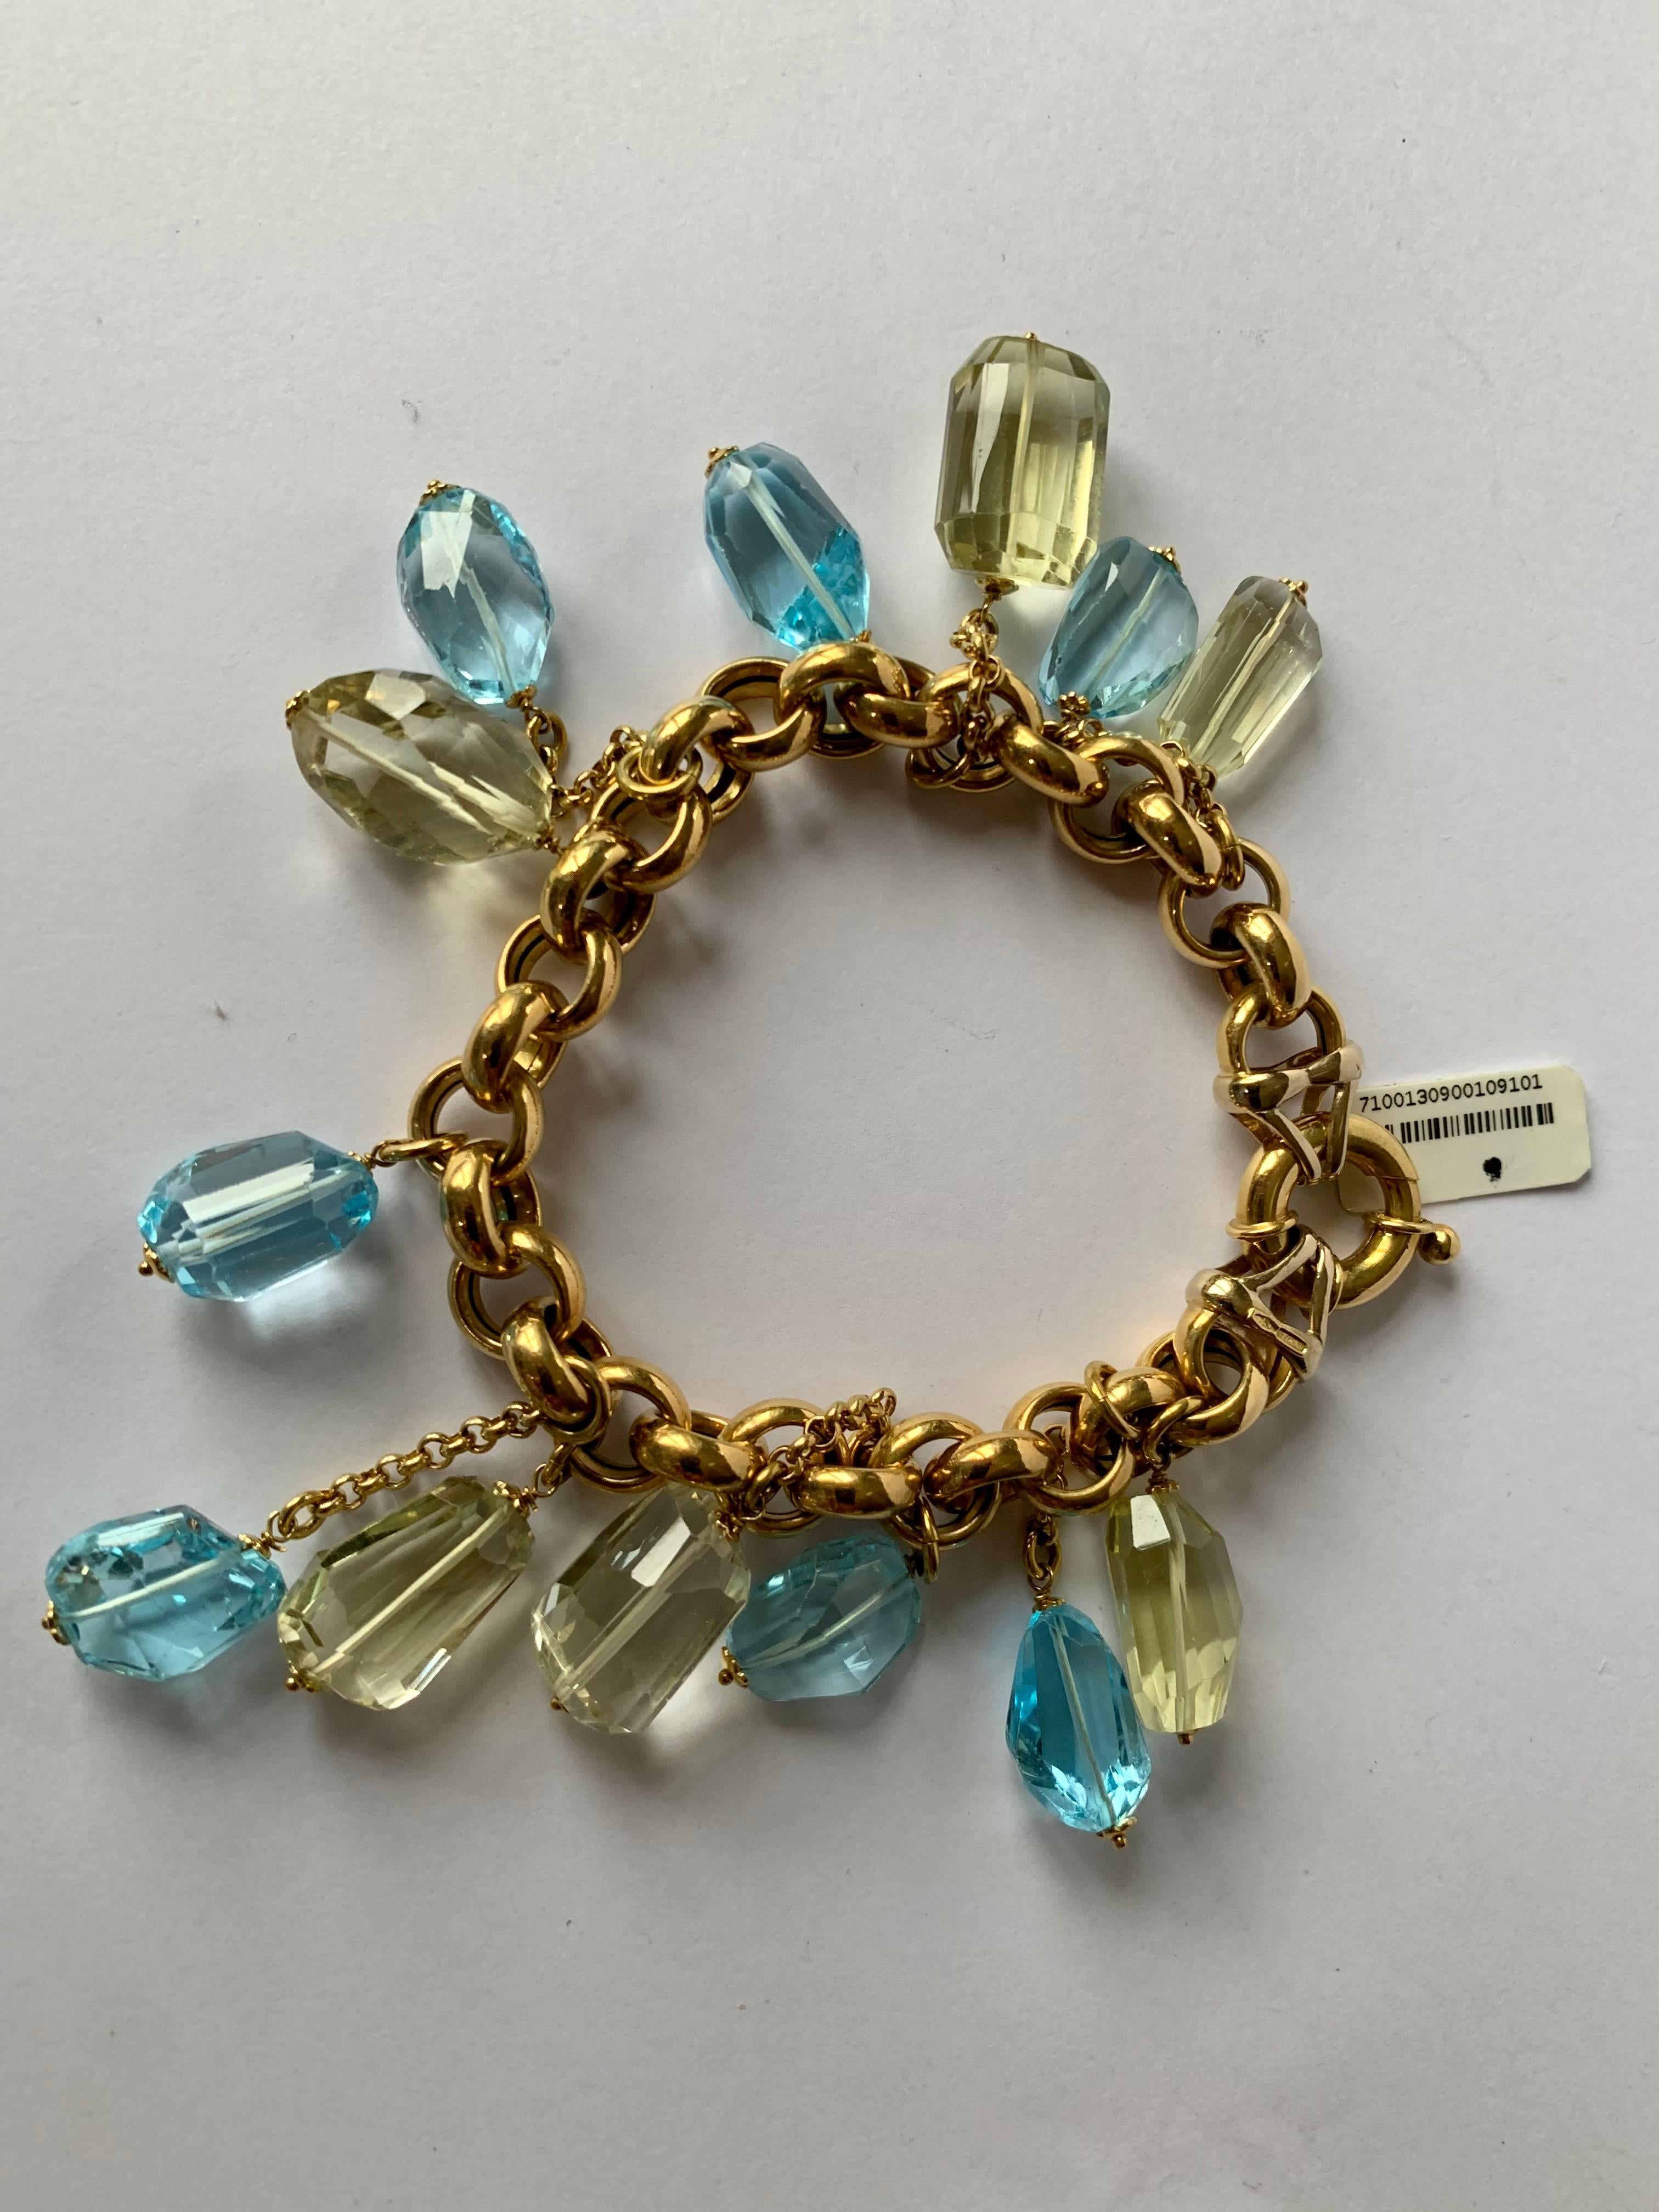 A lovely and playful 18 K yellow Gold charm bracelet with Blue Topaz and Lemon Citrine. 
A romantic design with pastel gemstones. 
Made in Italy. 
Length: 21 cm. 
Masterfully handcrafted piece! Authenticity and money back is guaranteed.
For any